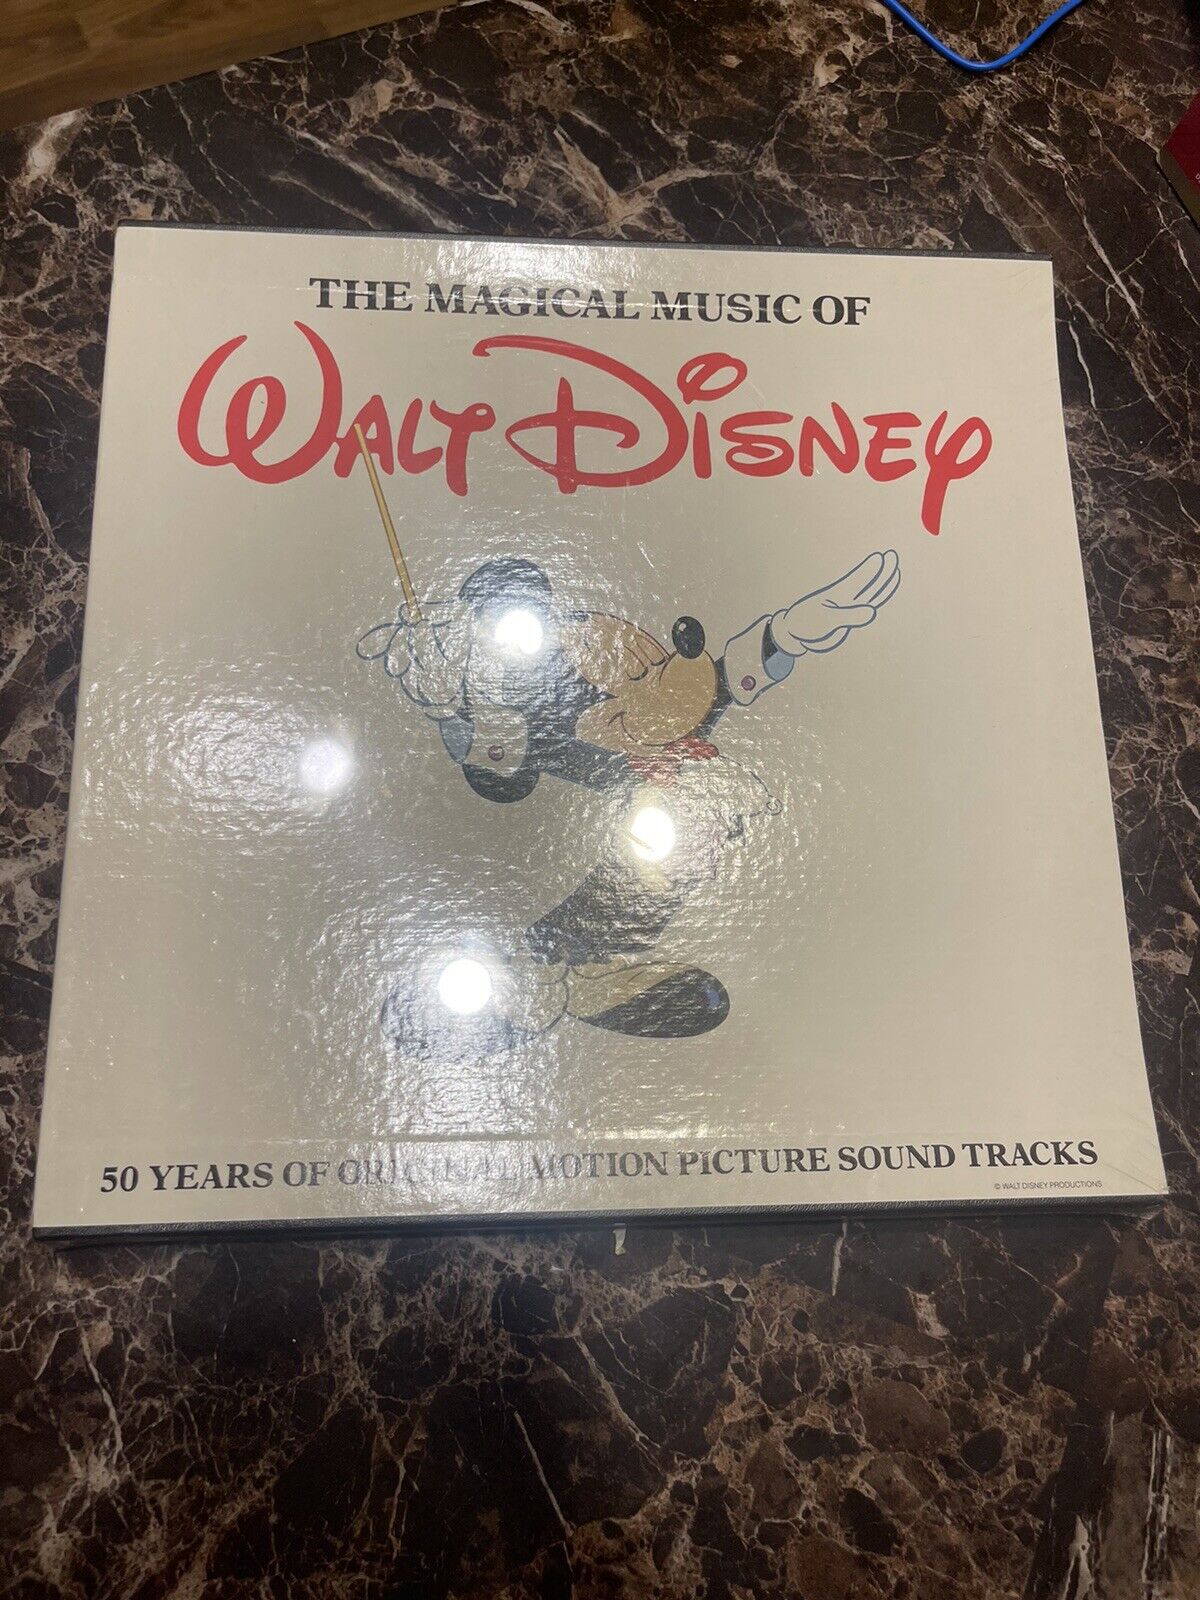 New & Sealed The Magical Music of Walt Disney - 4 LP's Box Set of Movie Songs 